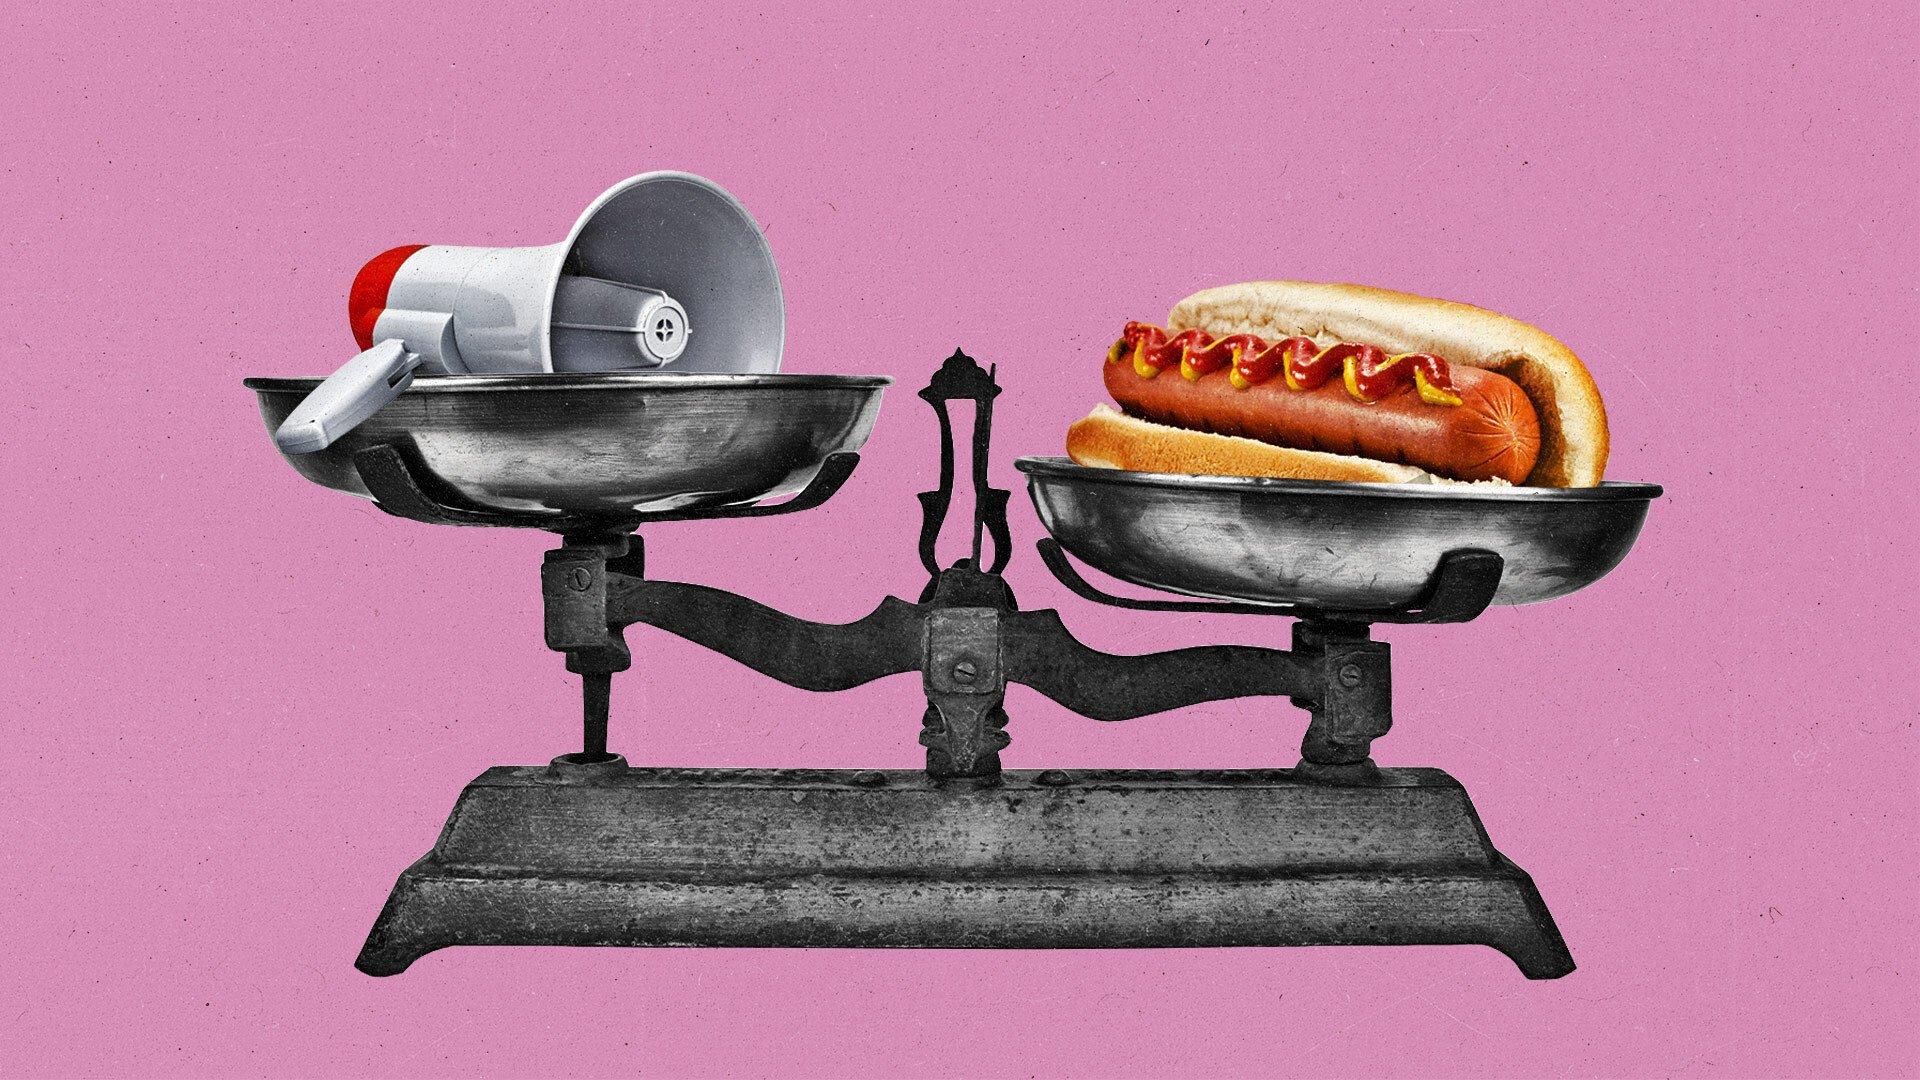 Scale with a hotdog on one side and a microphone on the other in front of a pink background.